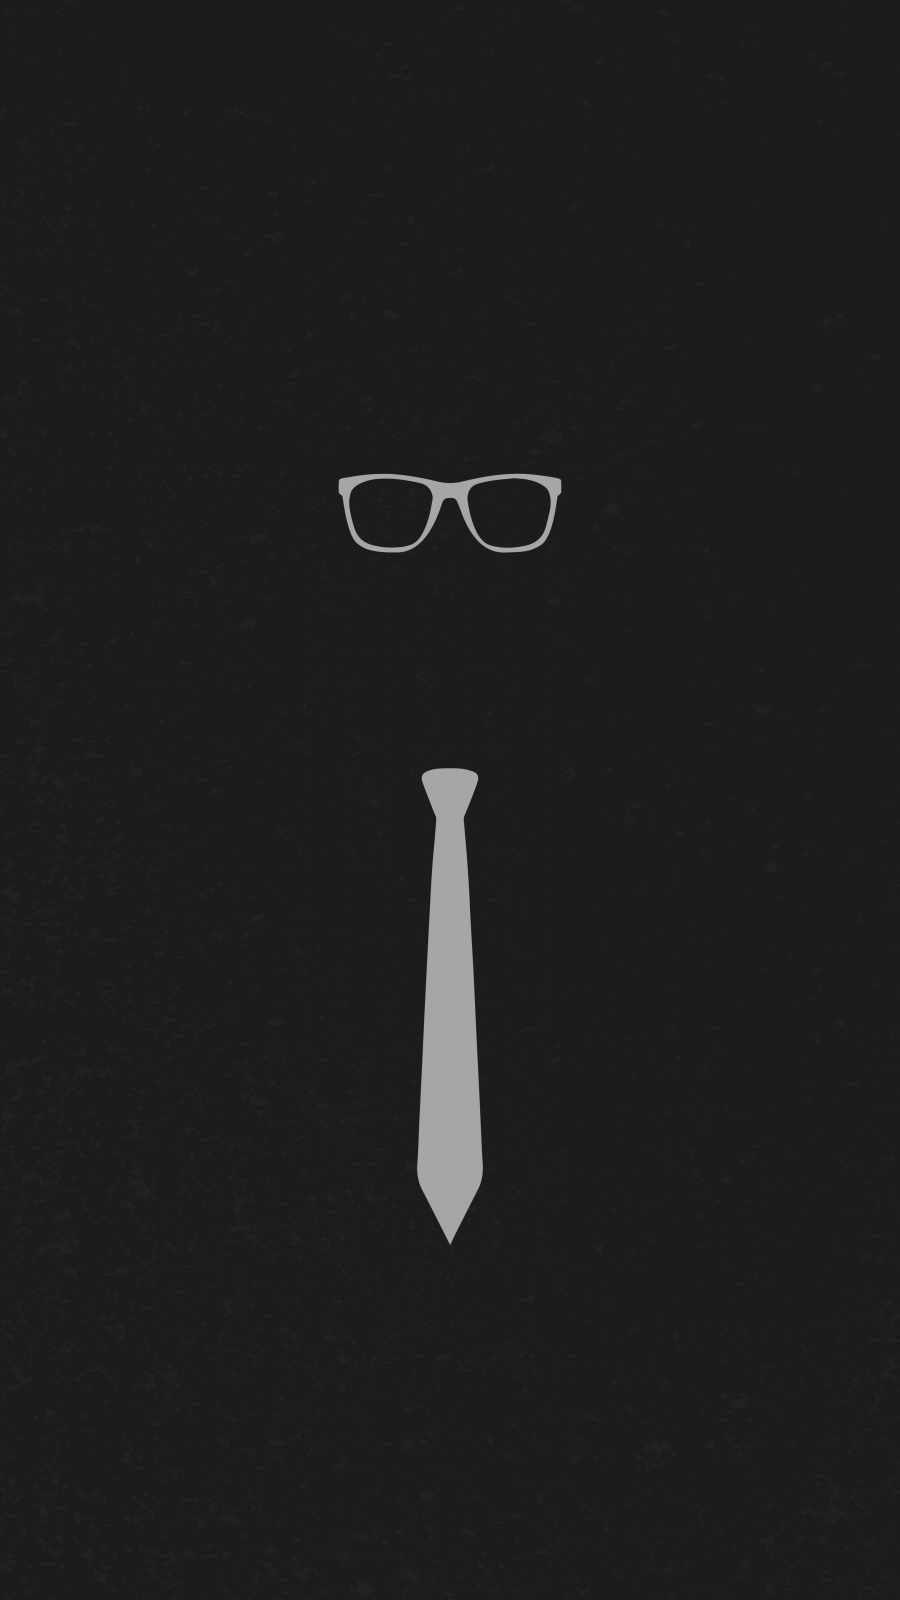 Glasses and Tie iPhone 15 Wallpaper